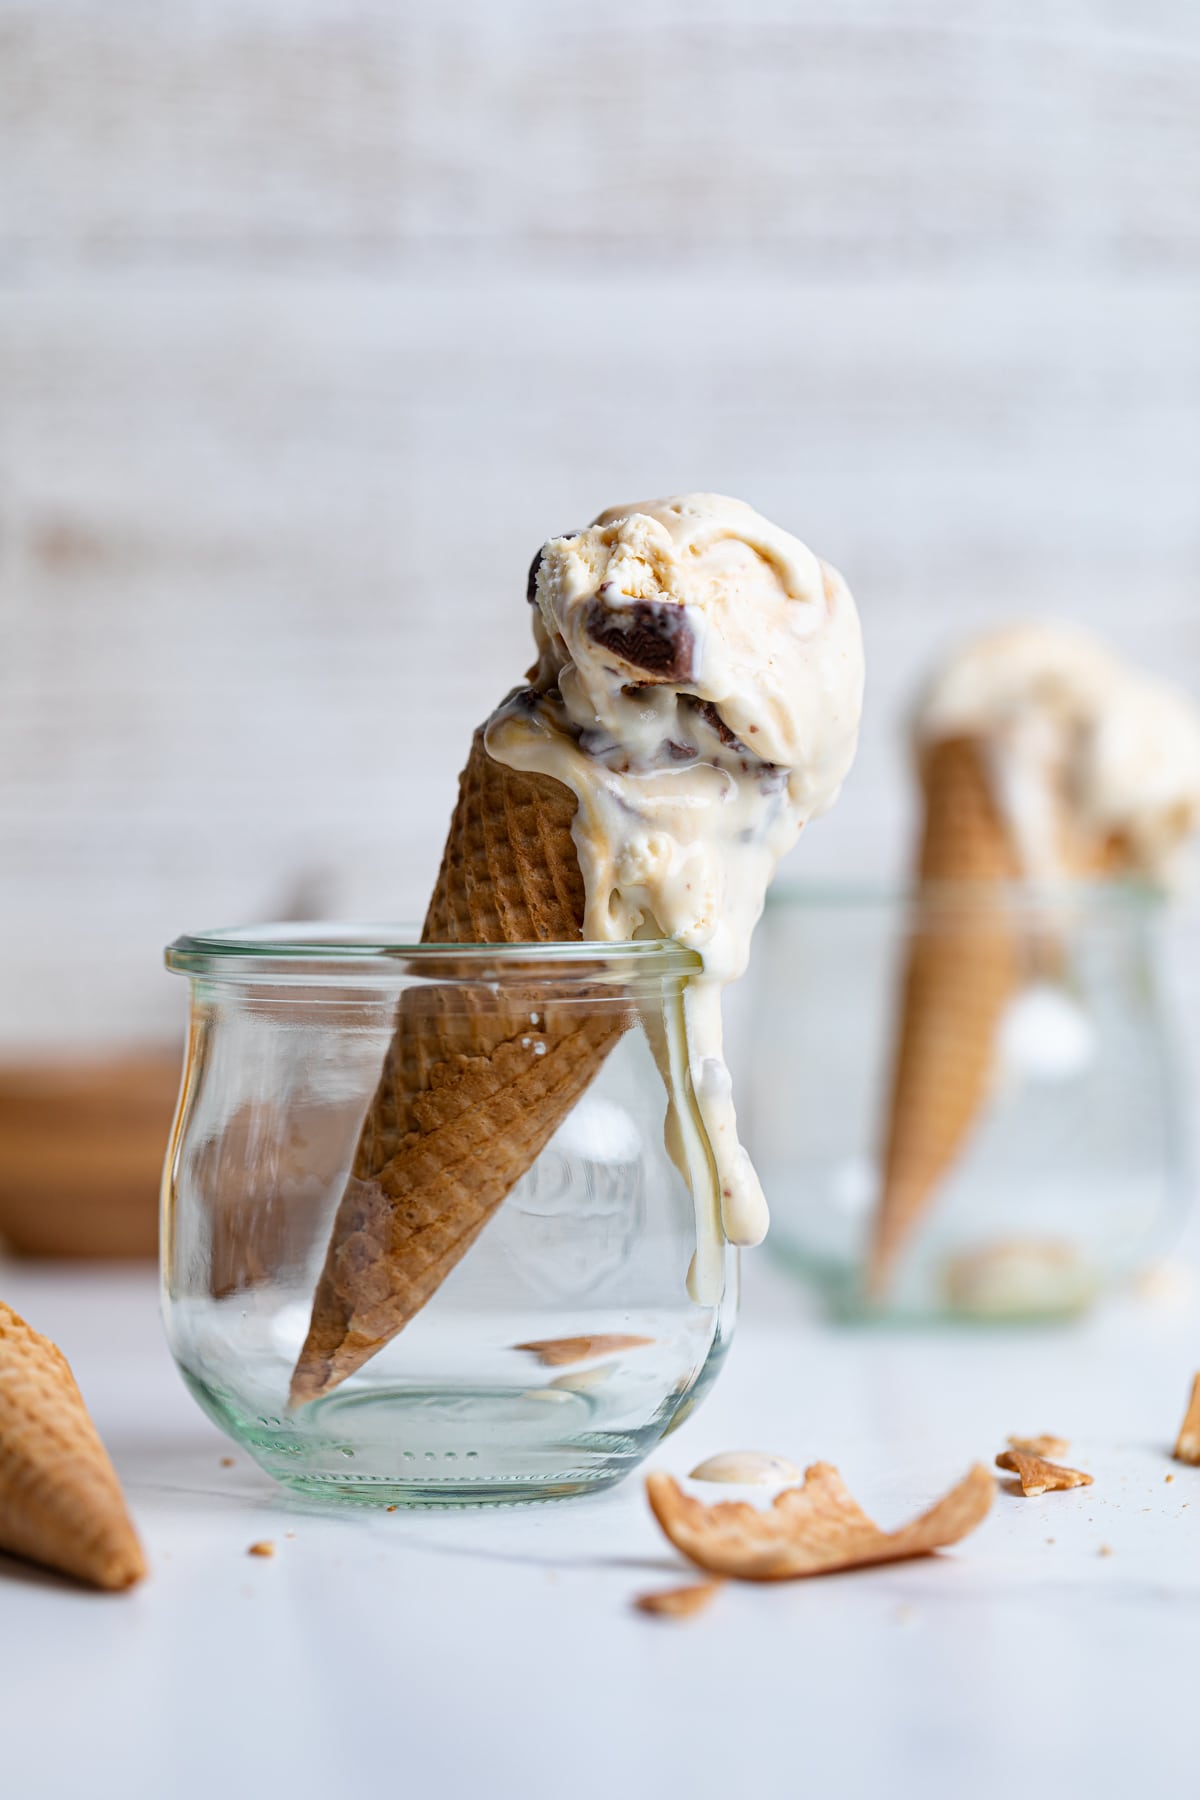 Loaded No-Churn Snickers Ice Cream